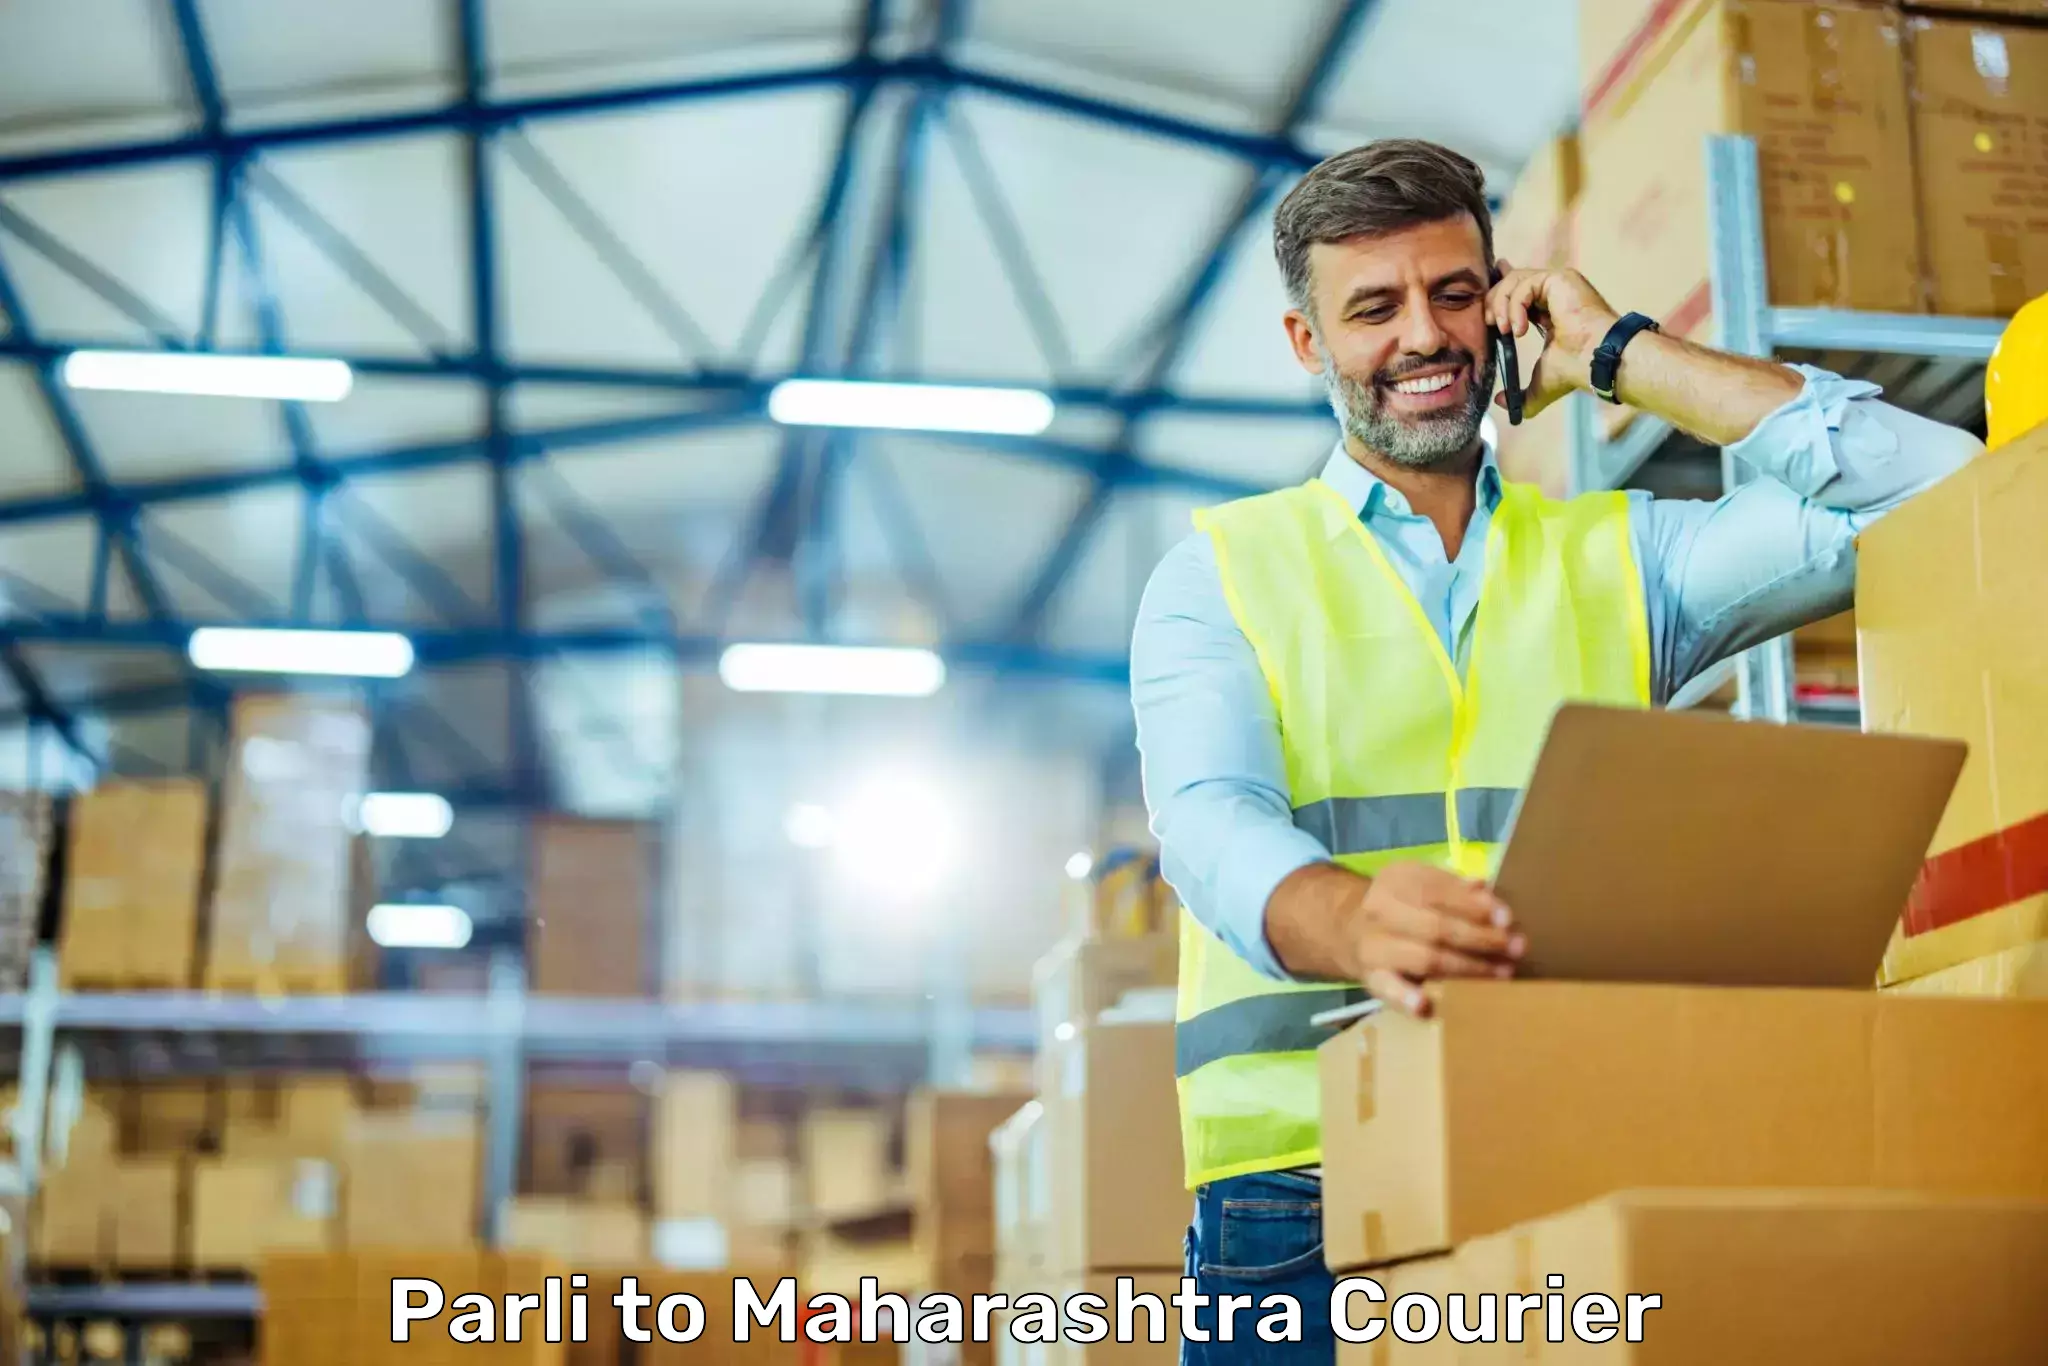 End-to-end delivery in Parli to Maharashtra